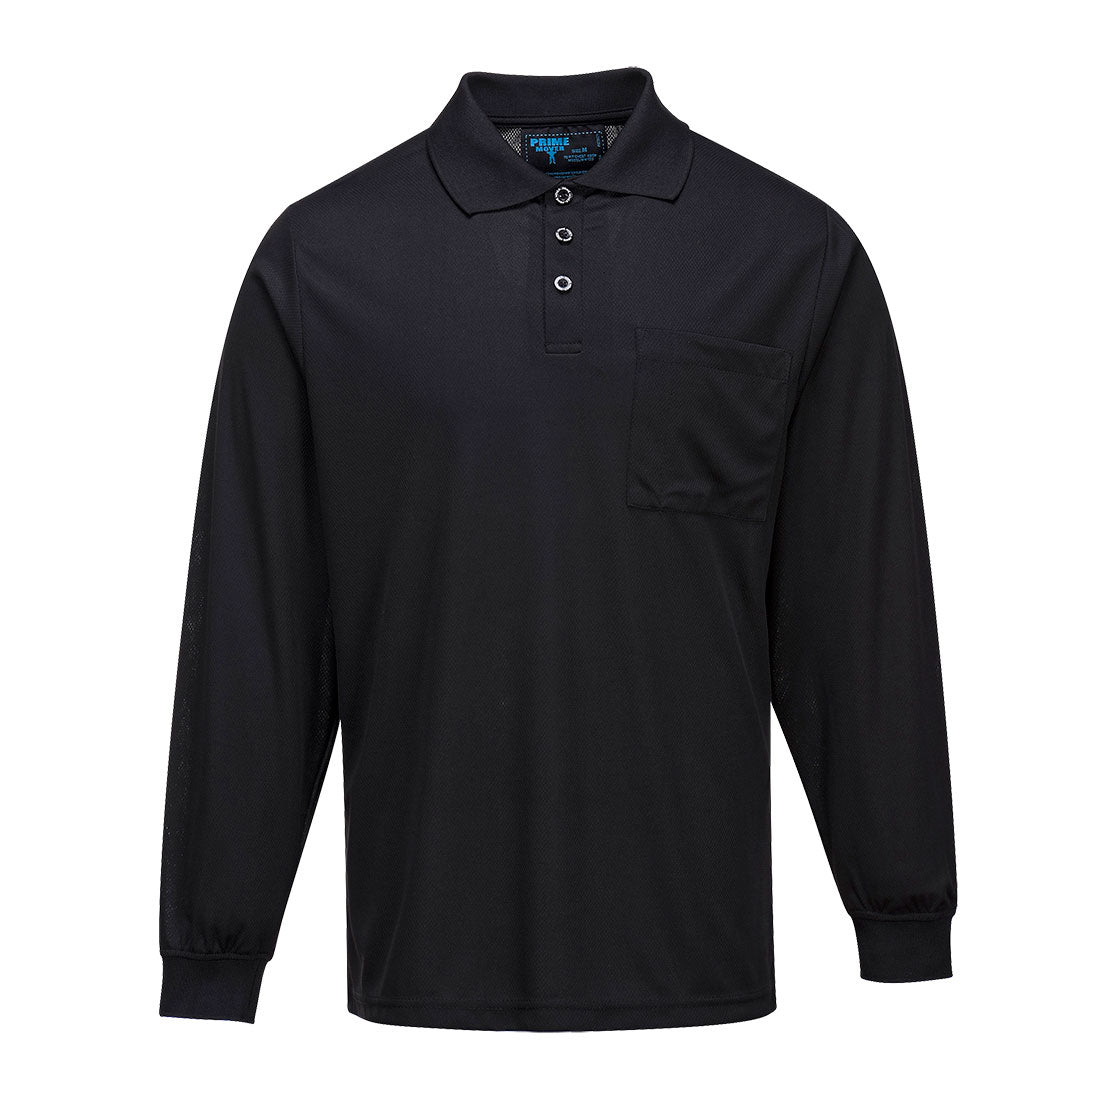 Portwest Long Sleeve Solid Colour Micro Mesh Polo (MP103)